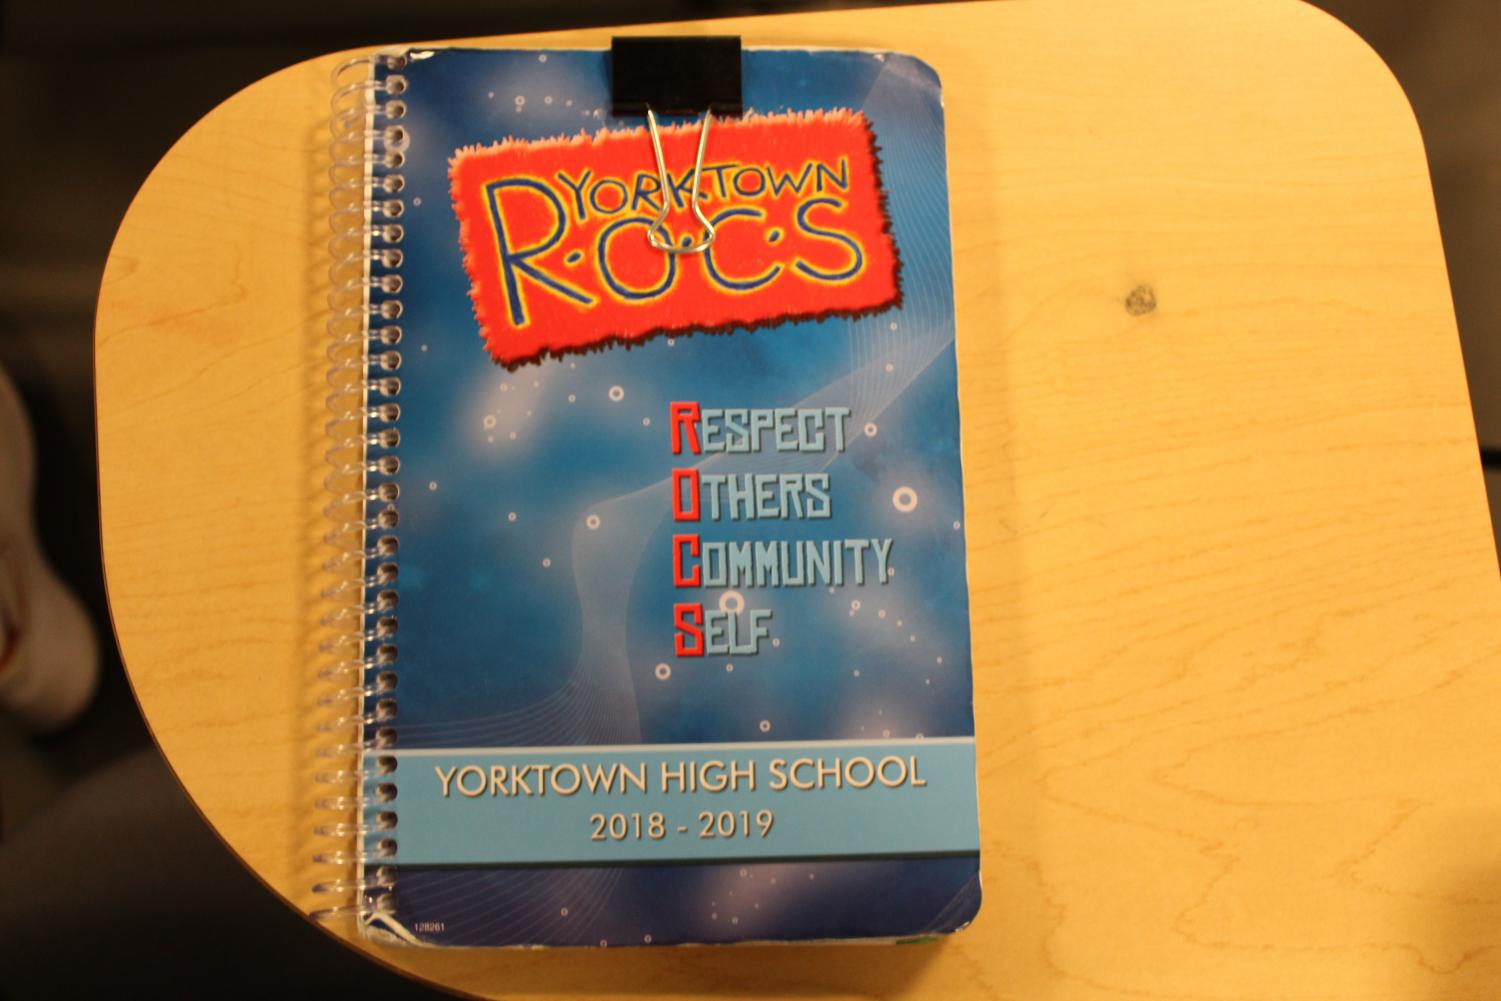 The agendas given to students have limited space. 